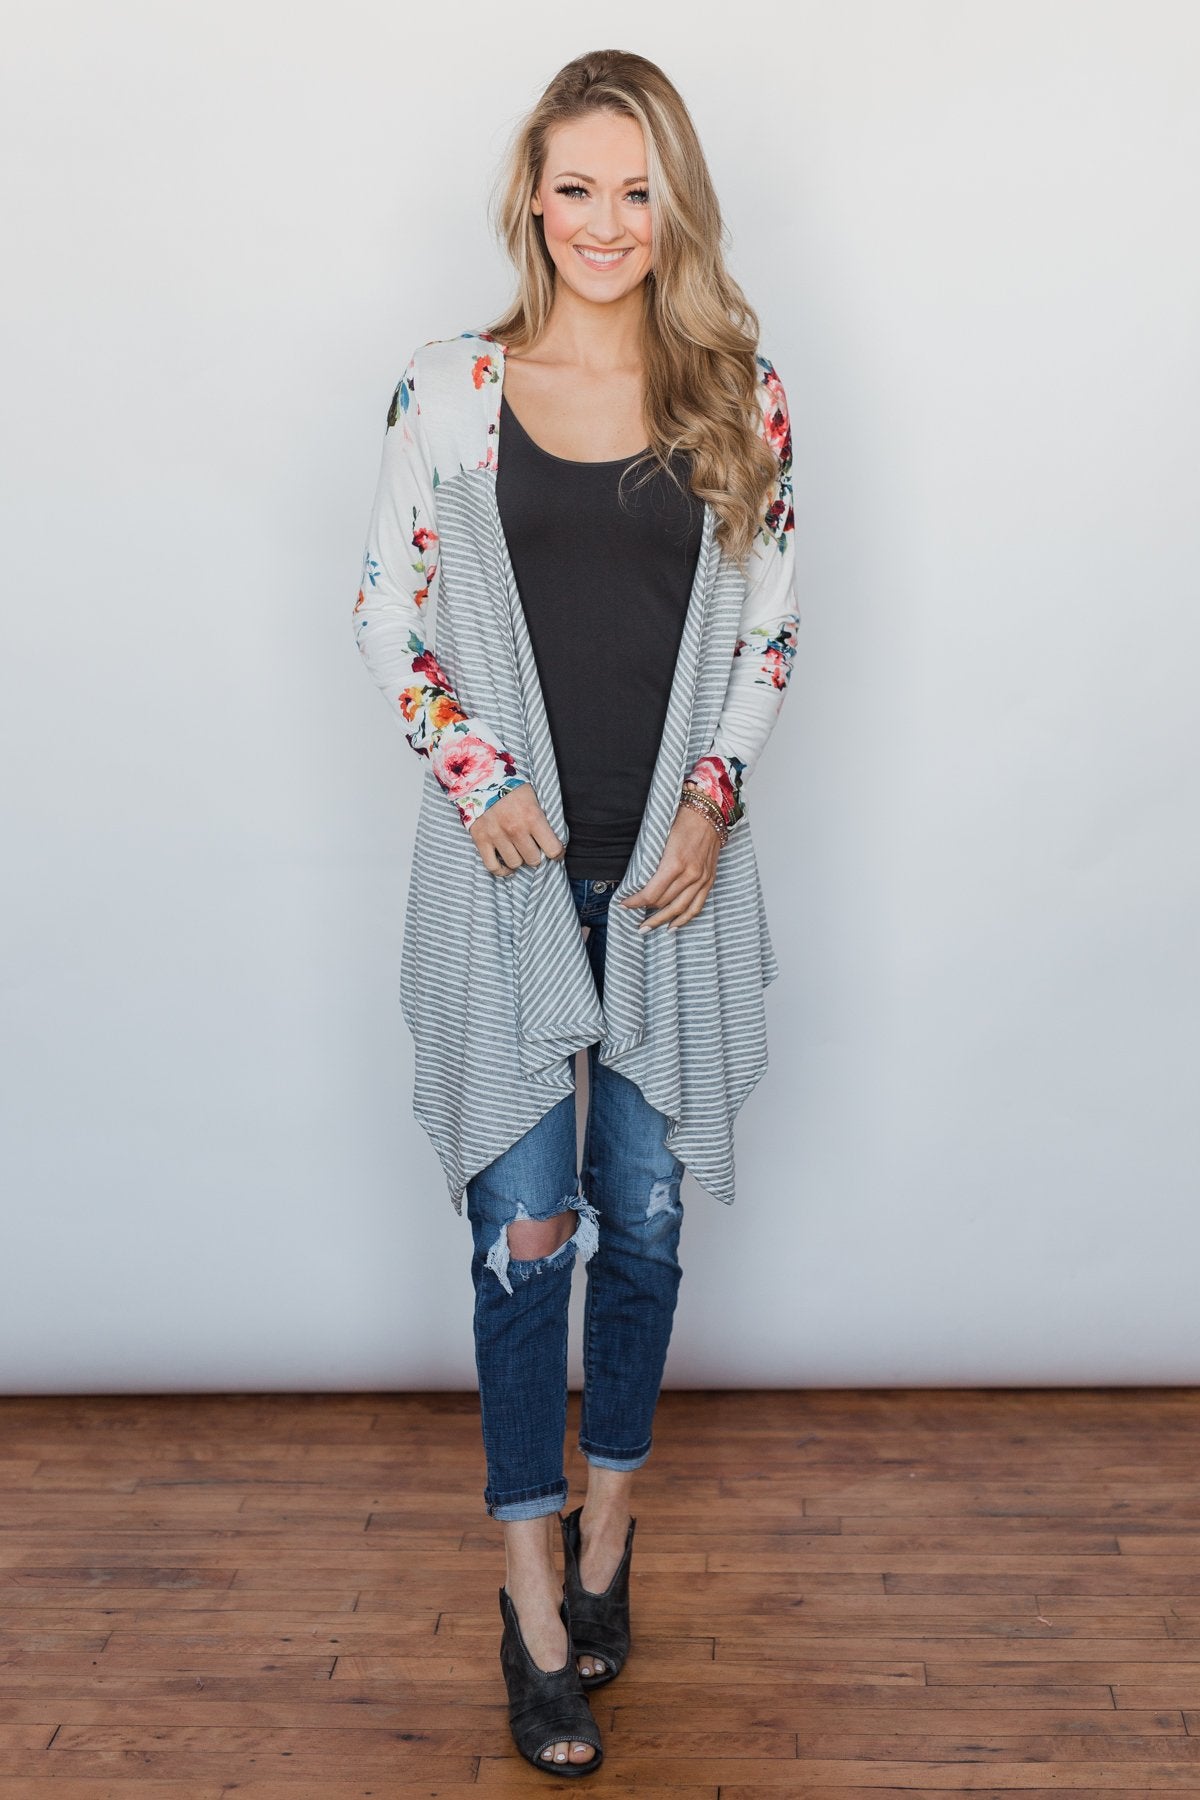 Easy Breeze Floral & Striped Cardigan- Ivory & Grey